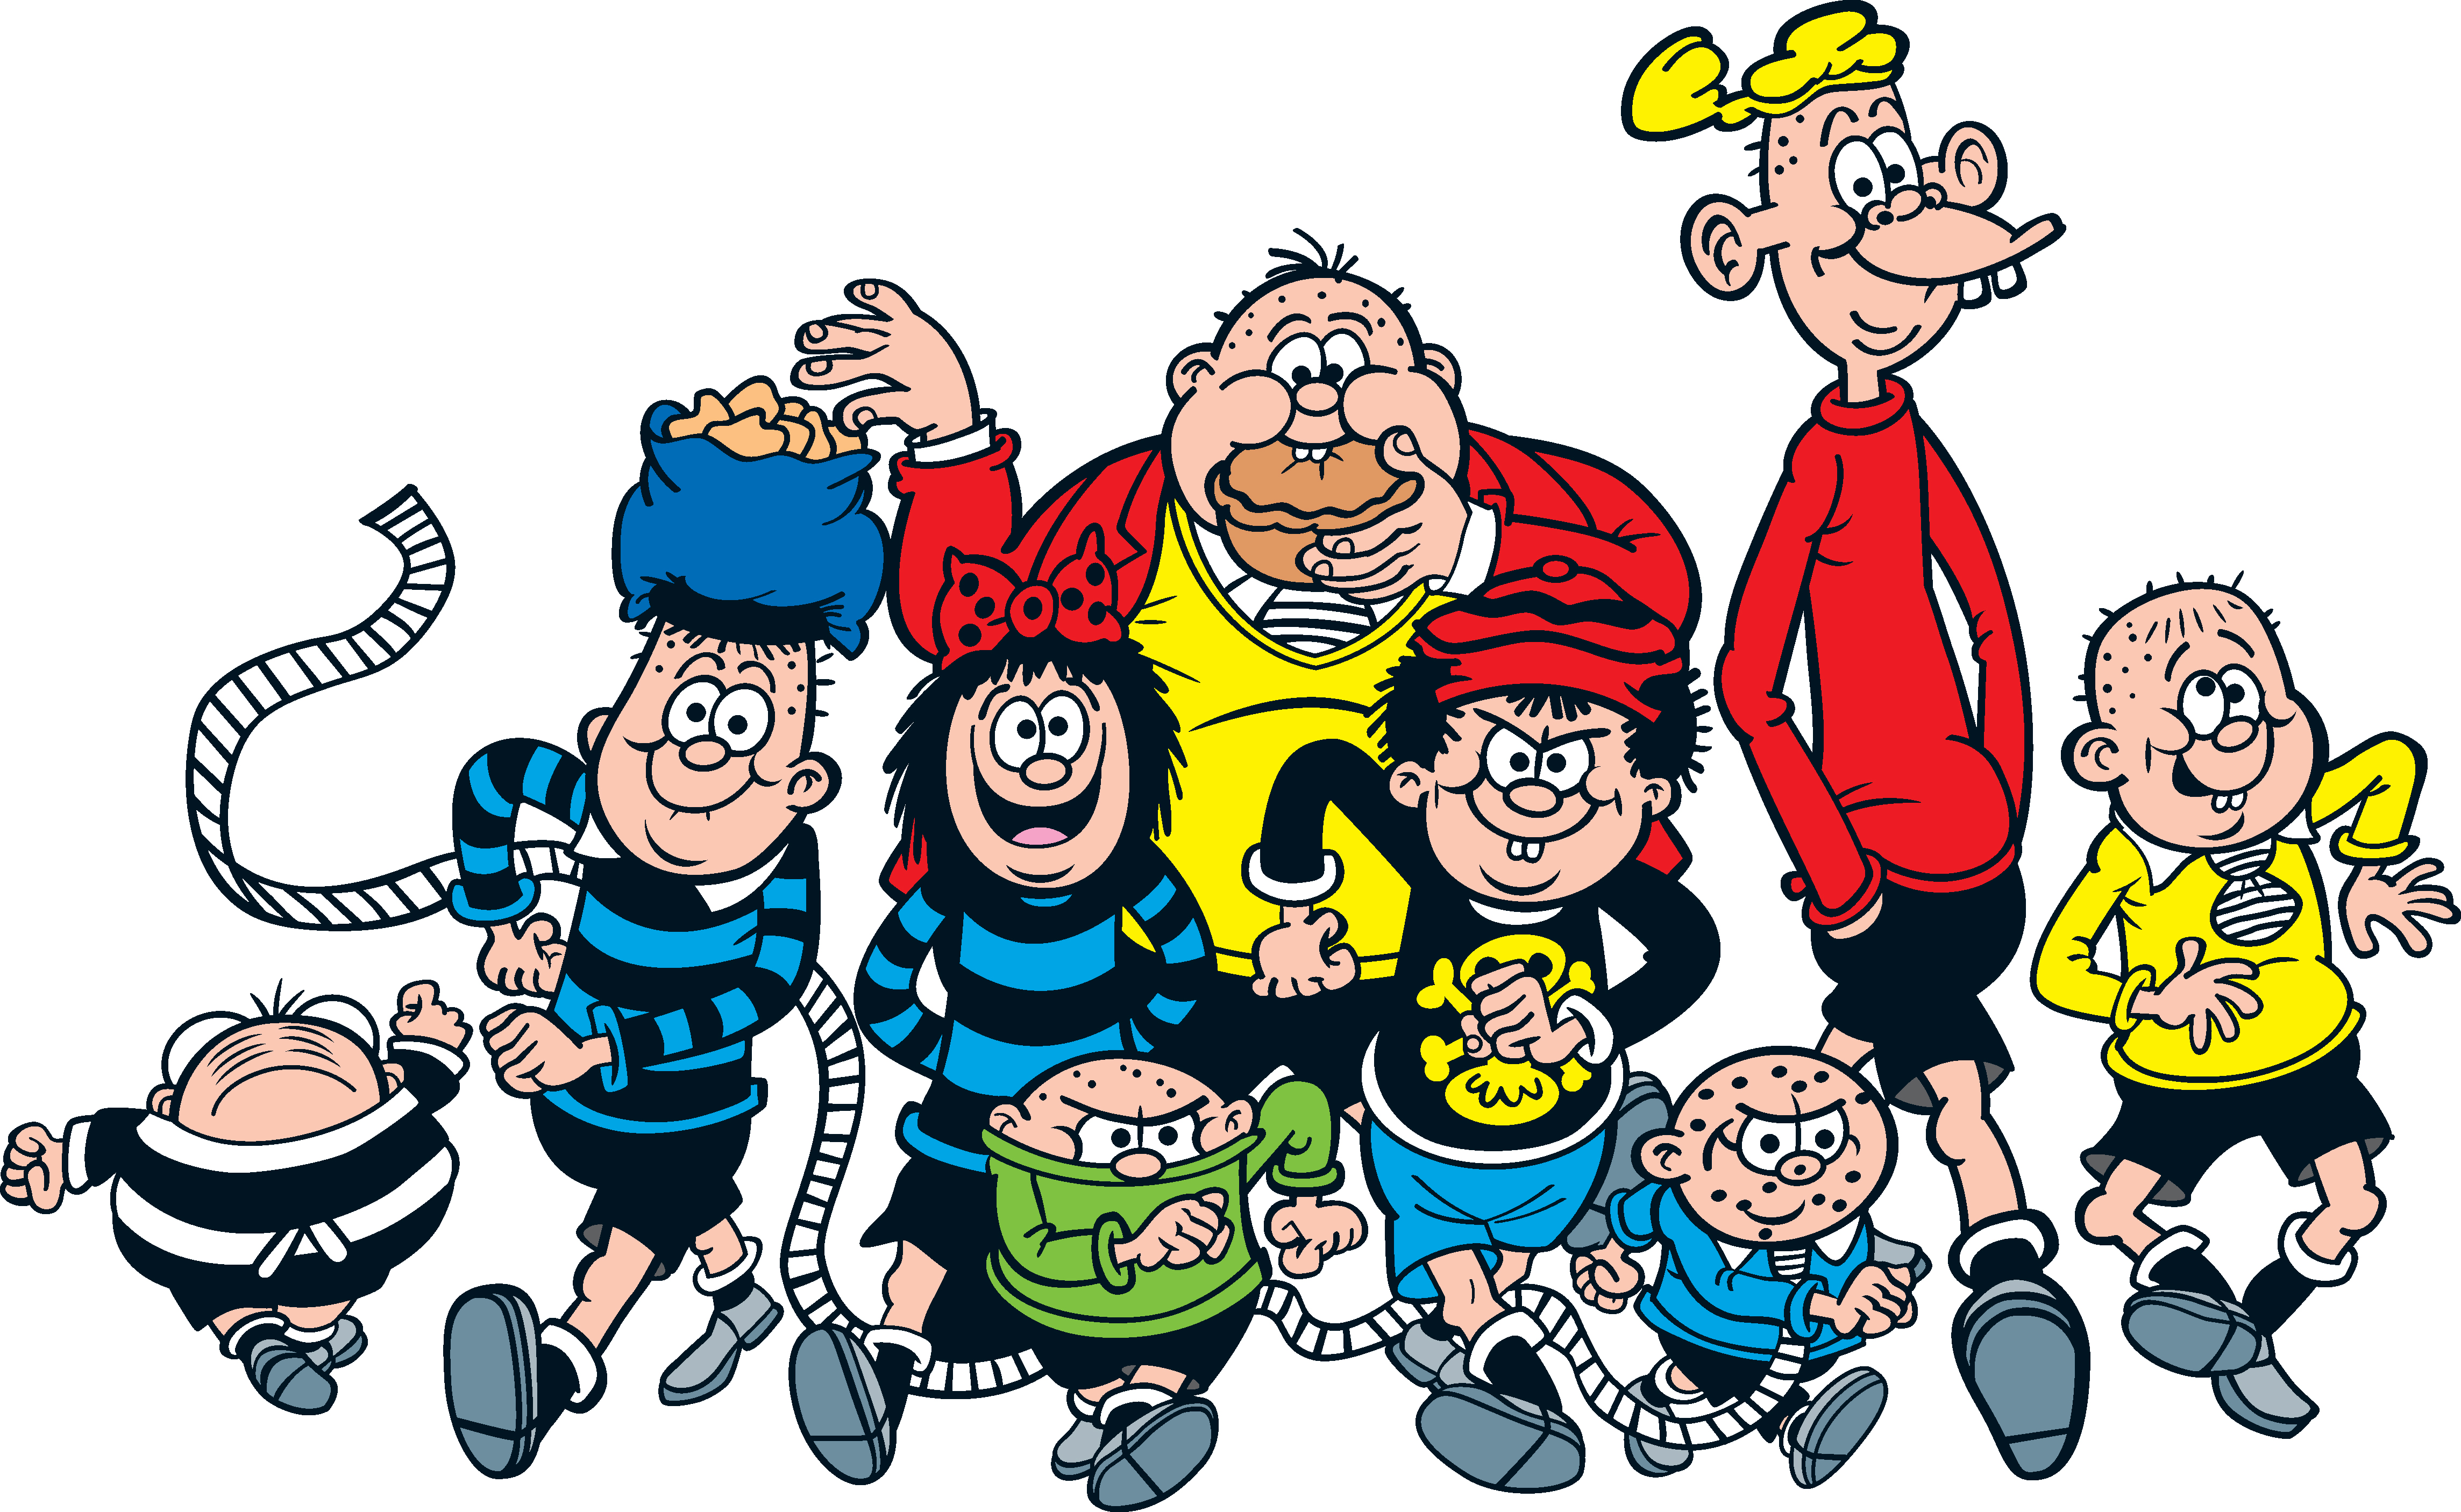 The Bash Street Kids are ready to make mischief